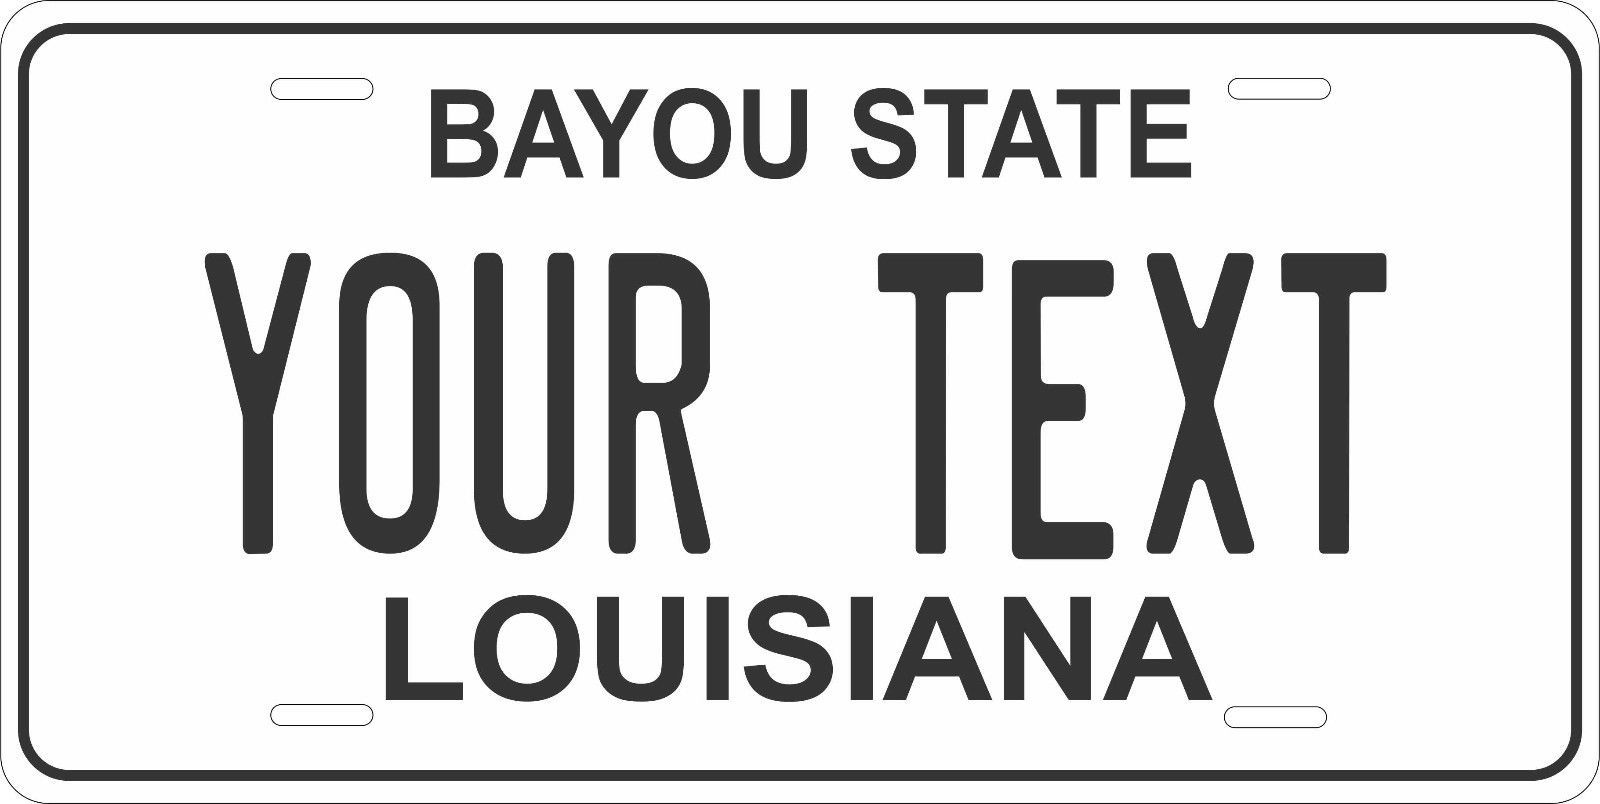 Louisiana 1977 License Plate Personalized Custom Car Bike Motorcycle Moped Tag - $10.99 - $18.22